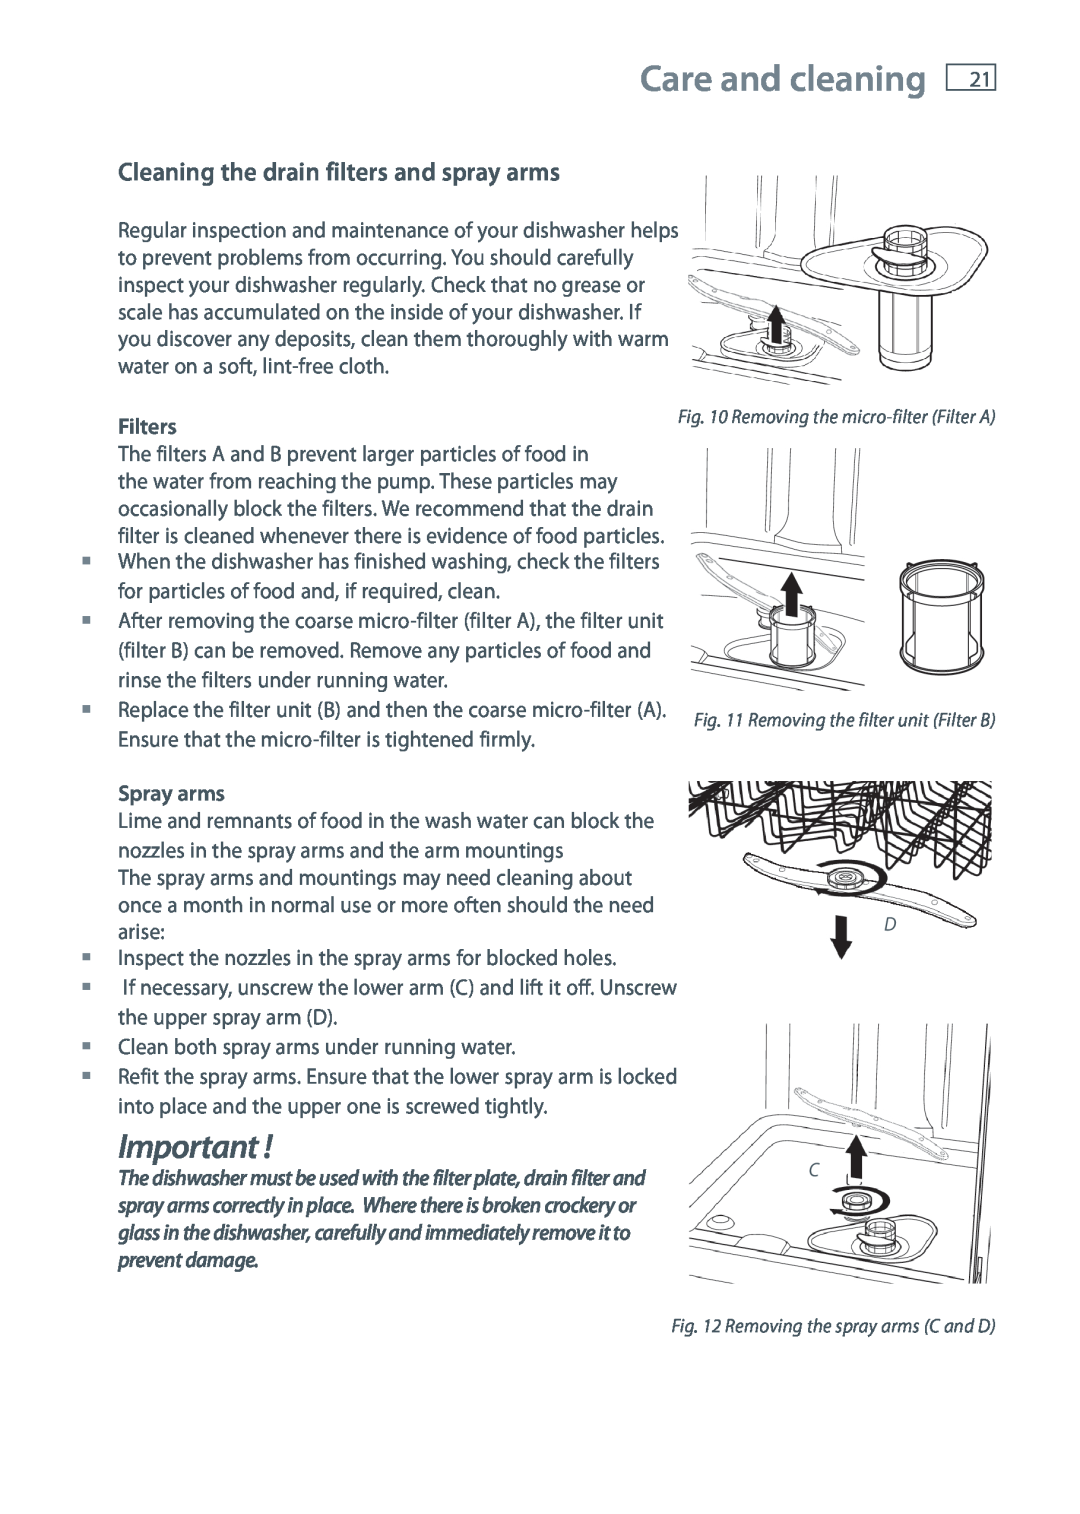 Fisher & Paykel DW60 installation instructions Care and cleaning, Cleaning the drain filters and spray arms 